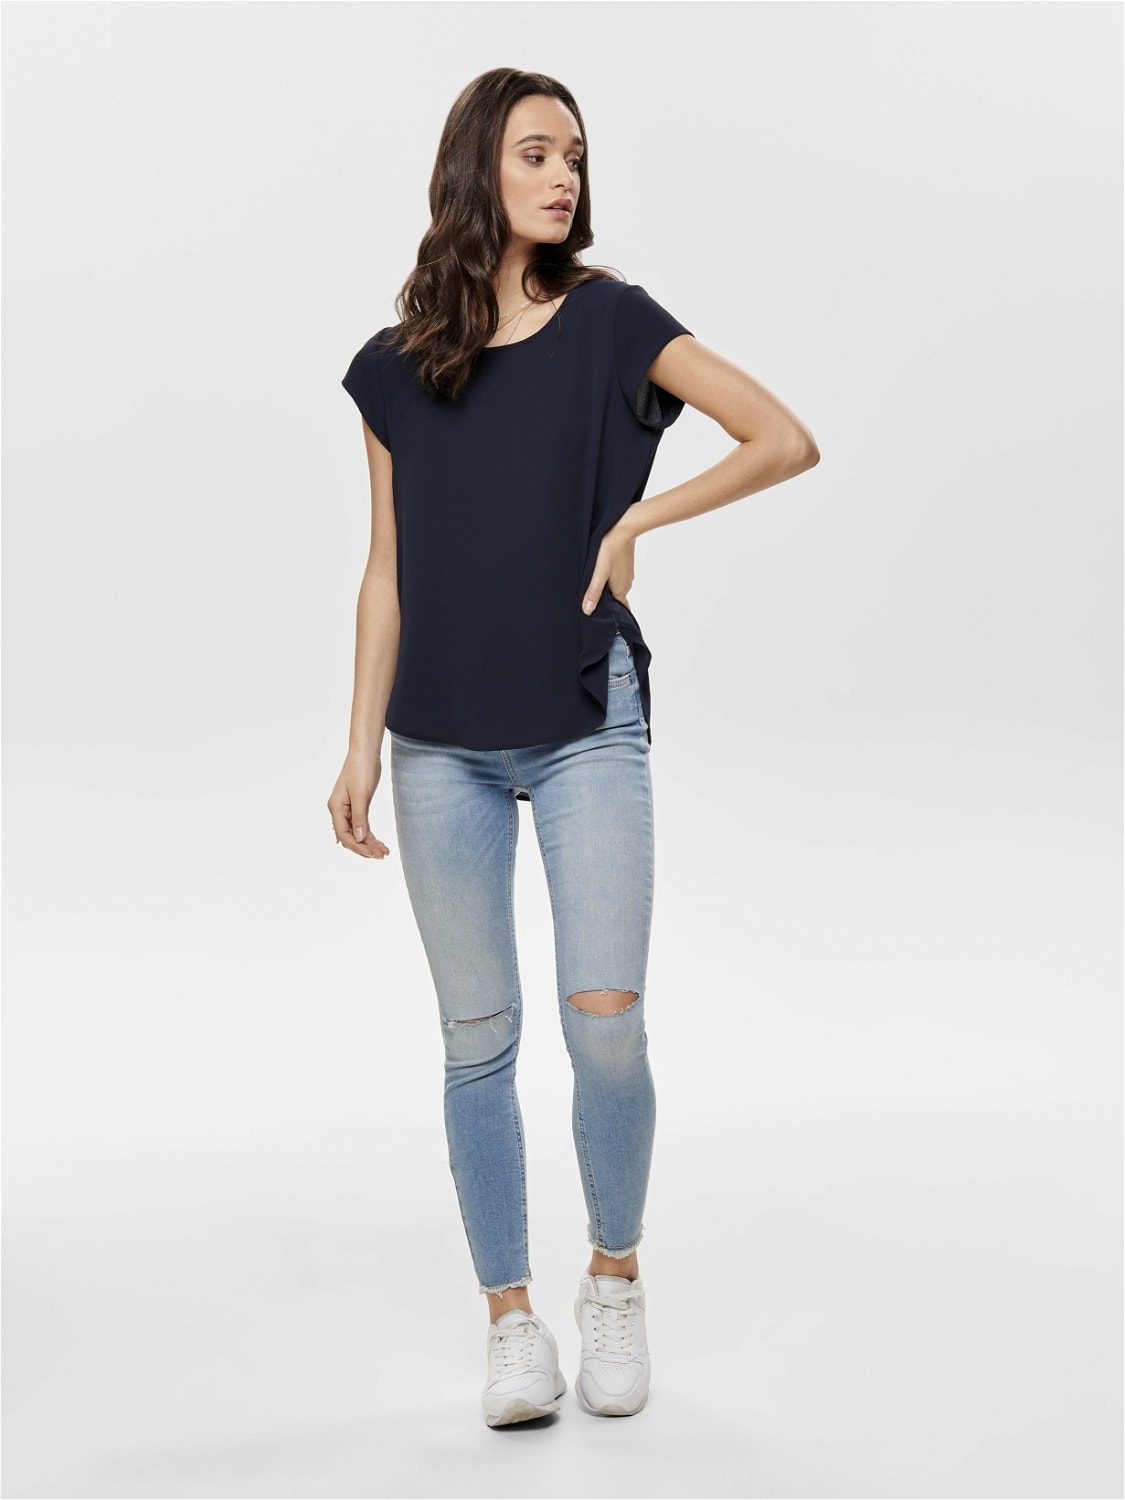 ONLY Regular Fit Round Neck Top -Night Sky - 15142784